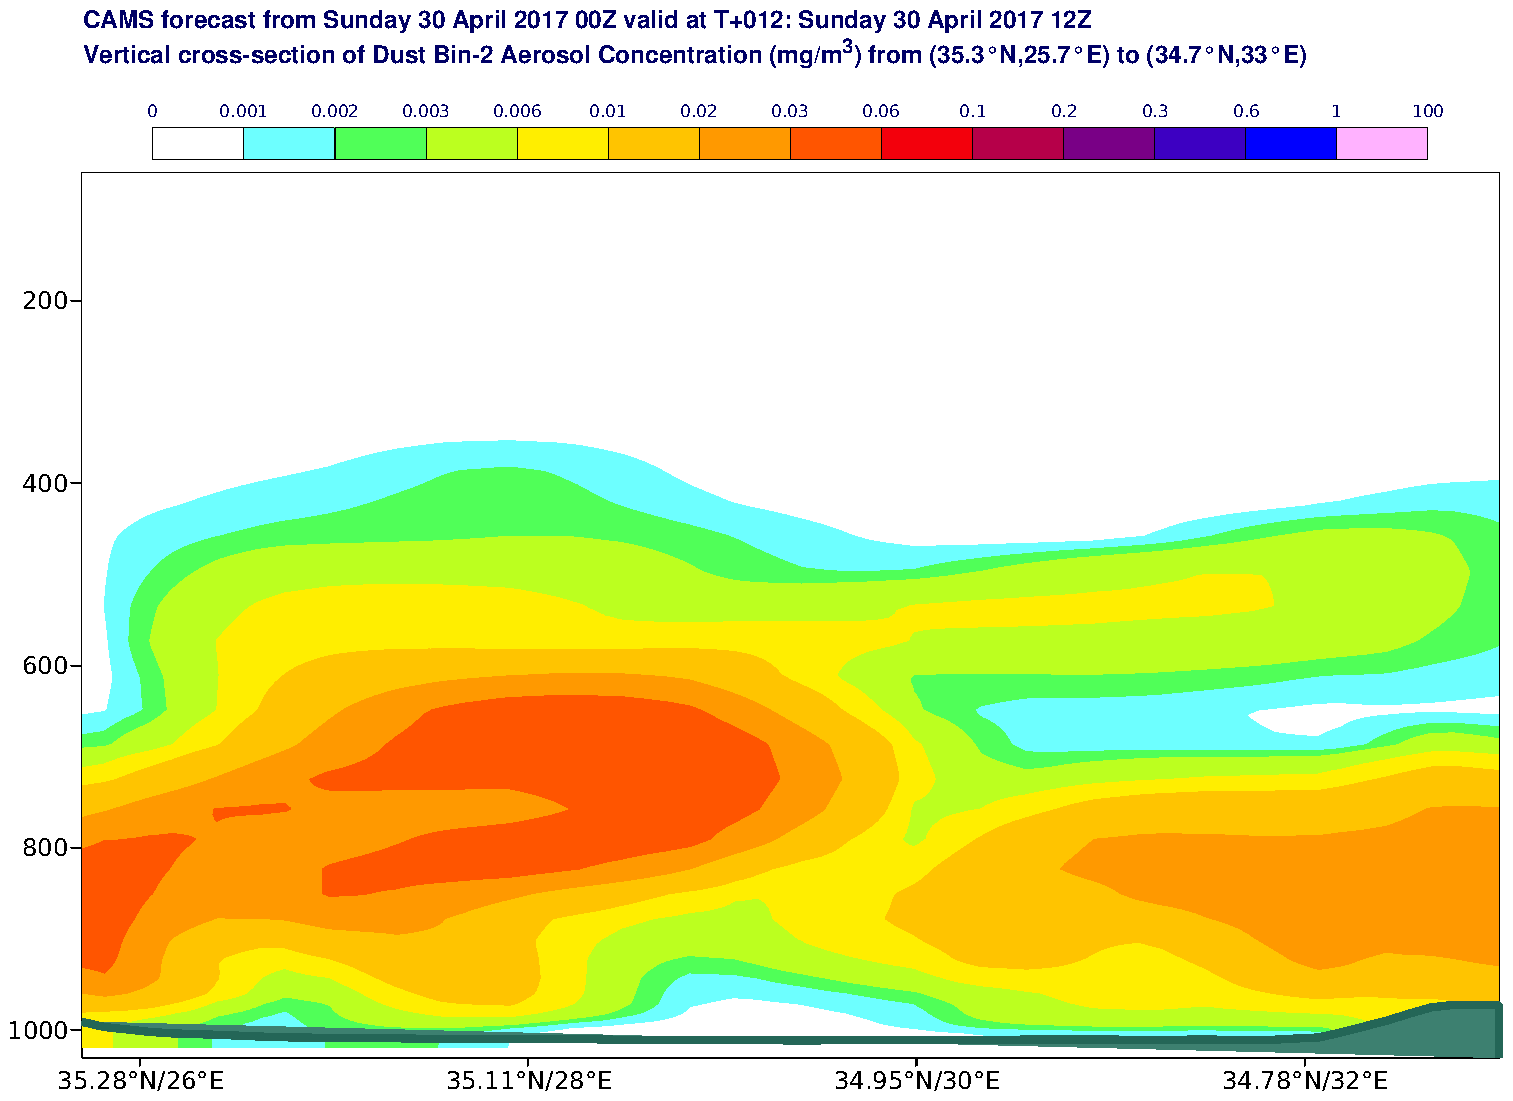 Vertical cross-section of Dust Bin-2 Aerosol Concentration (mg/m3) valid at T12 - 2017-04-30 12:00